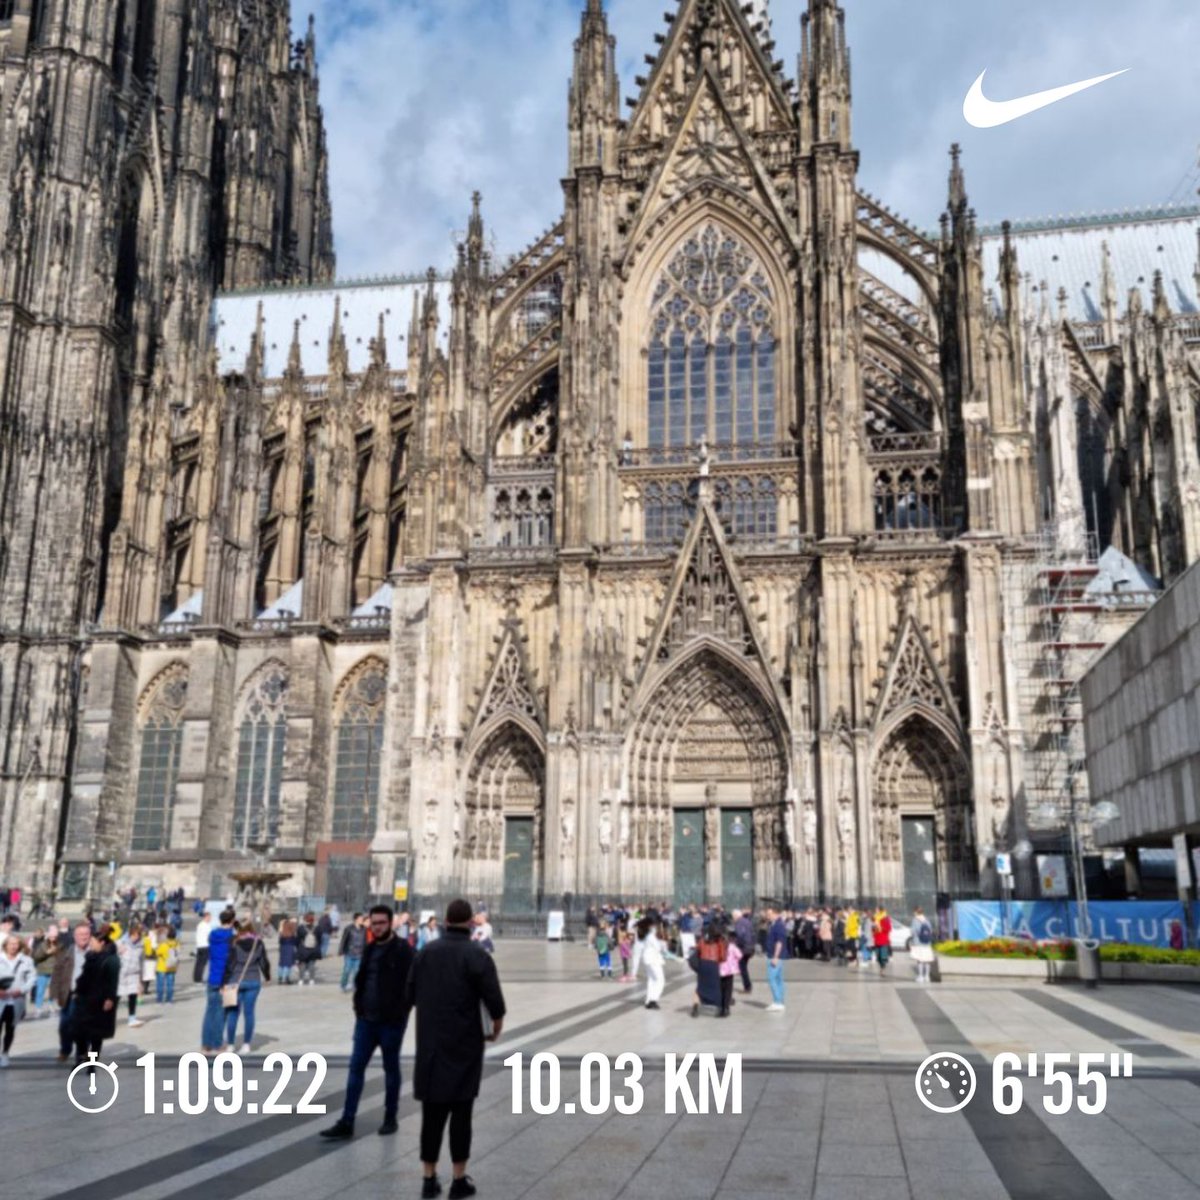 Saturday morning run along Rhine River in #Cologne #Germany. #MindfulPractice #RunningMan #runningwithtumisole #fitness